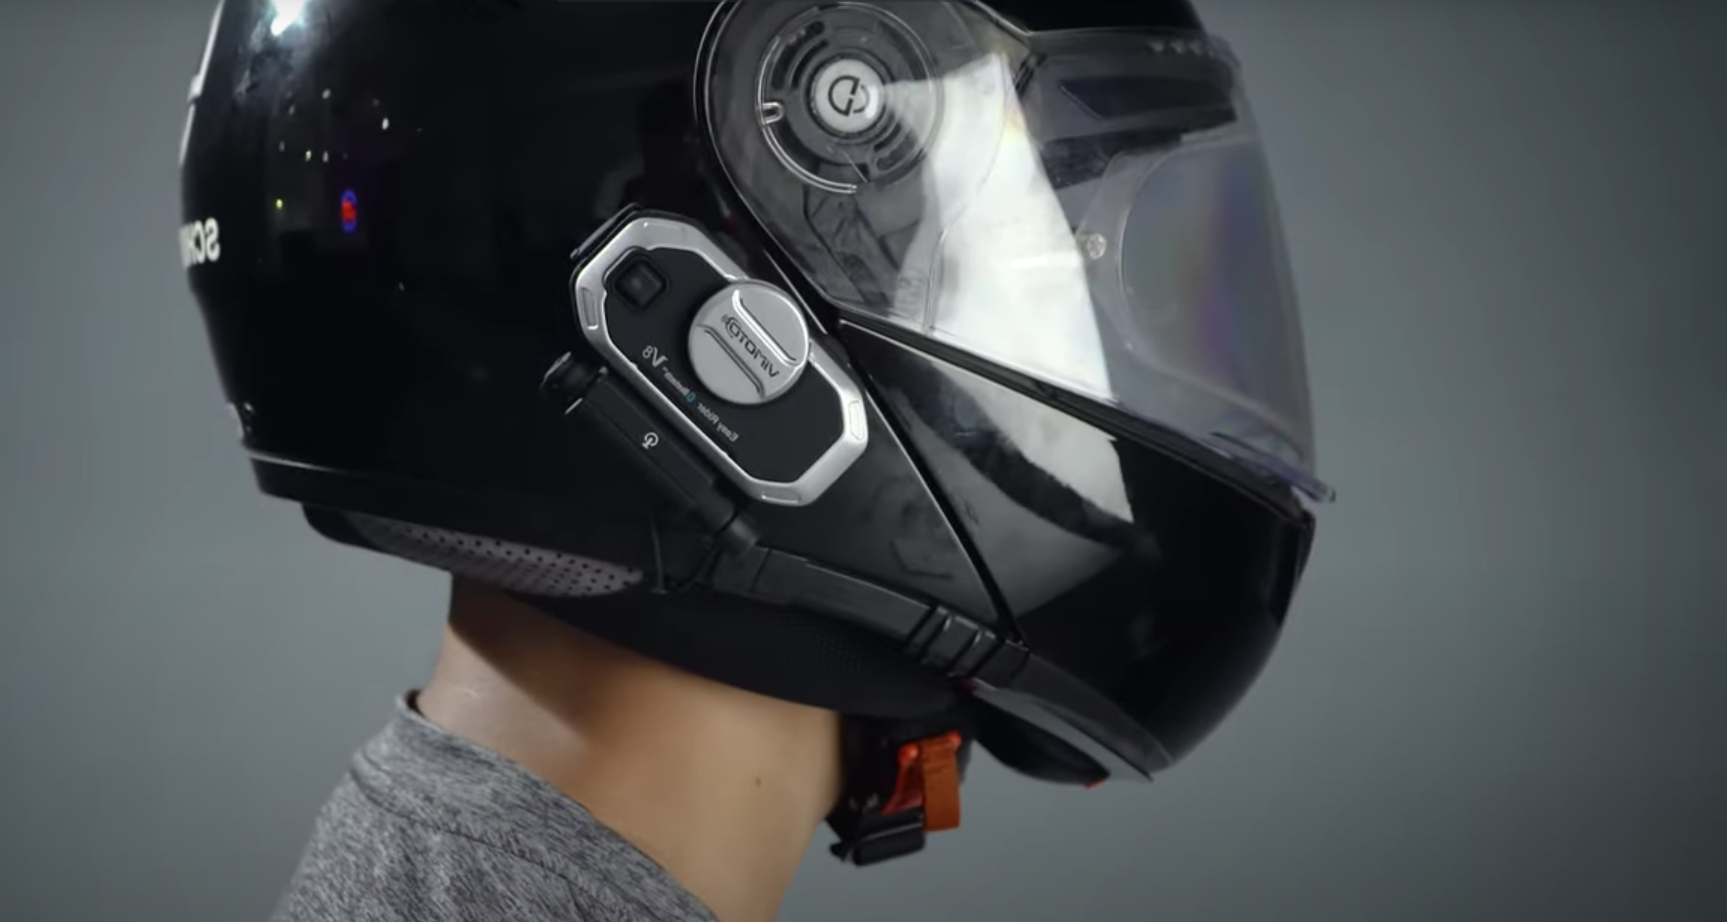 How To Make Smart Helmet For Motorcycle